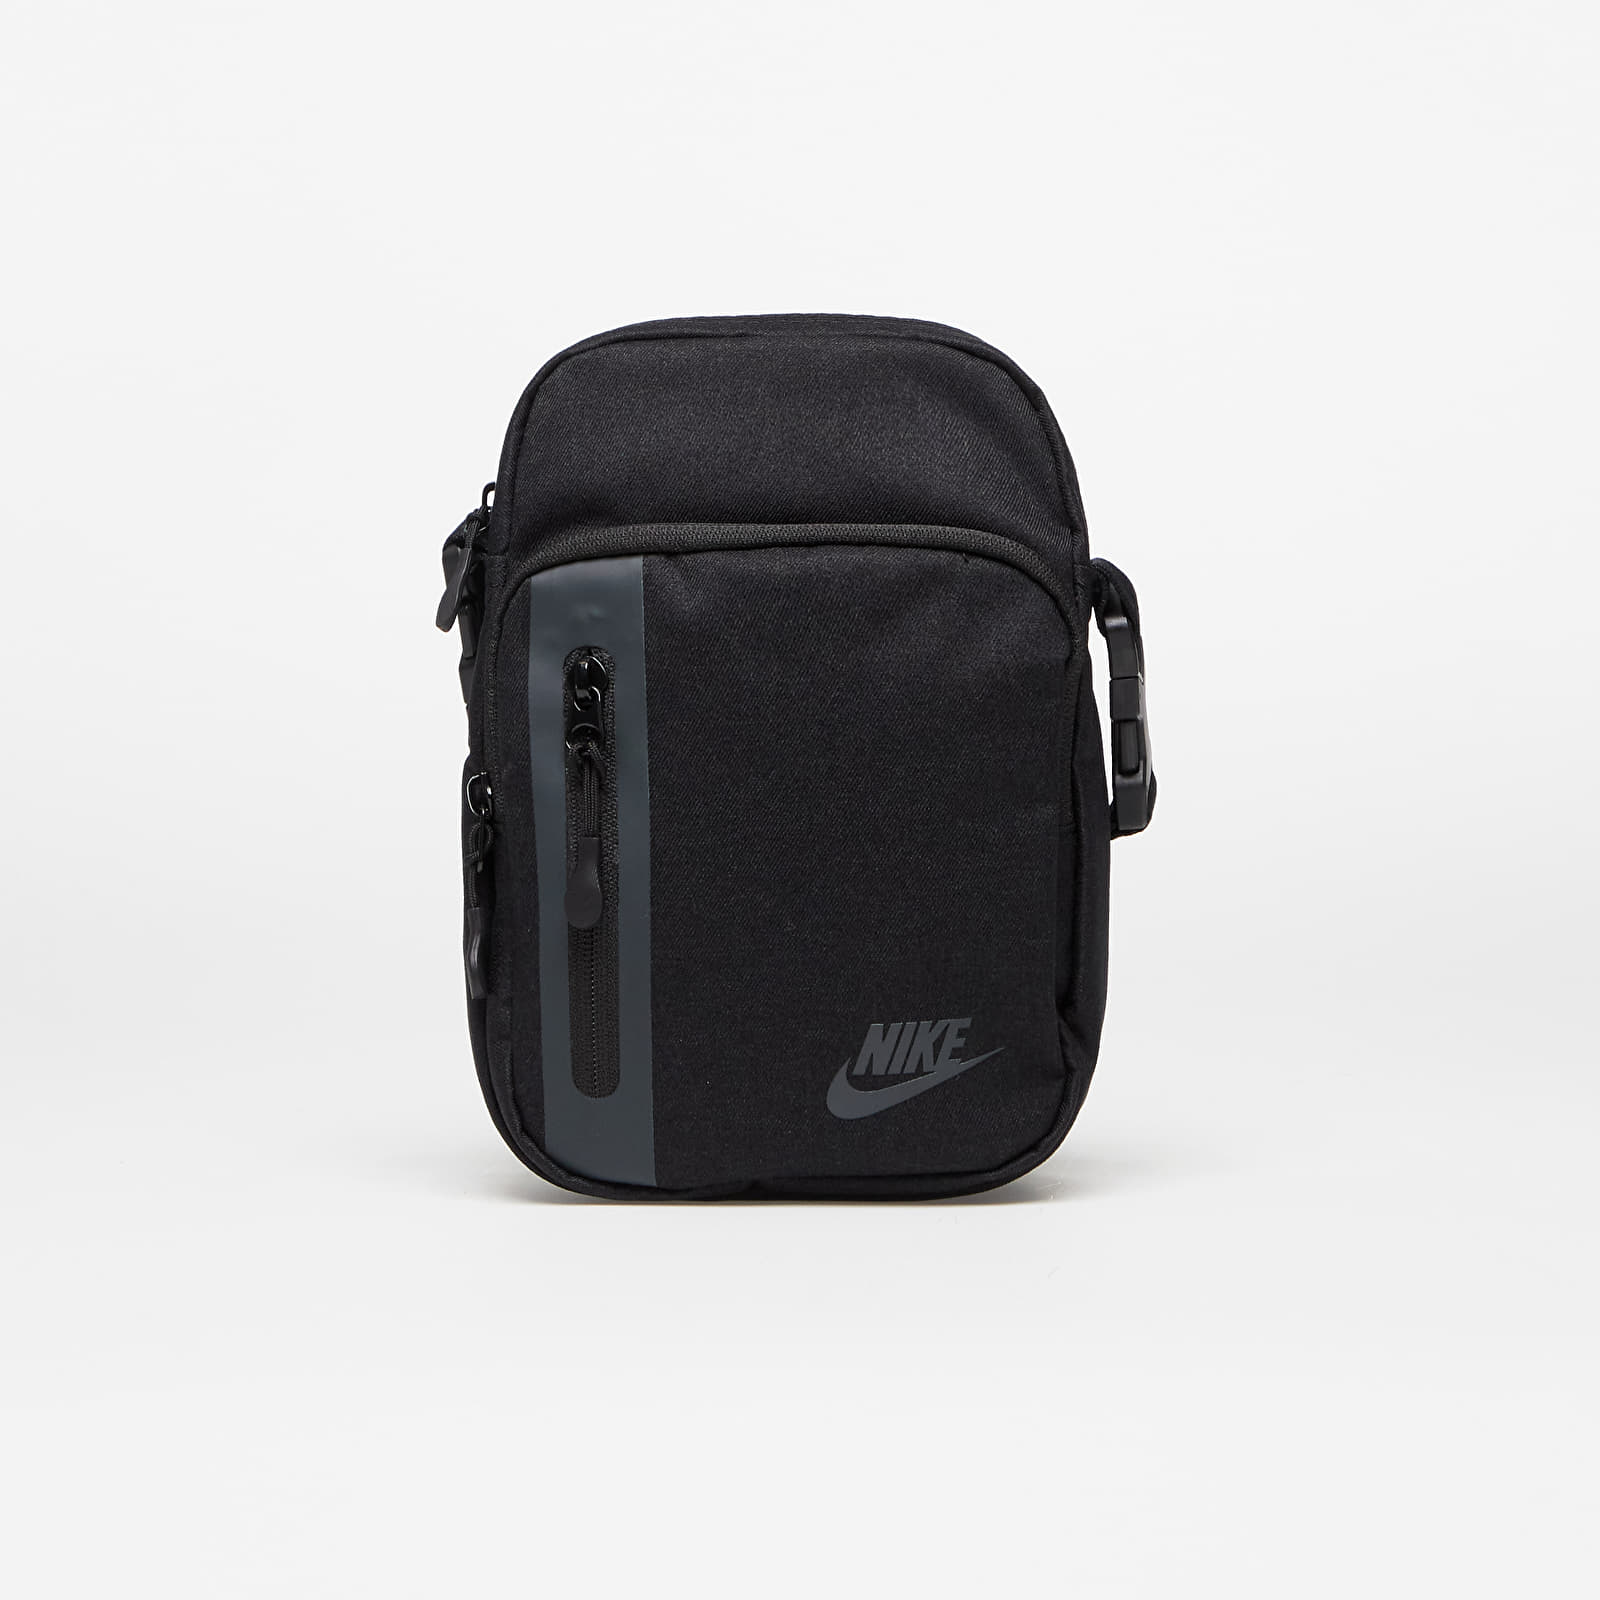 Nike Women's One Luxe Training Bag Sale on Lazada